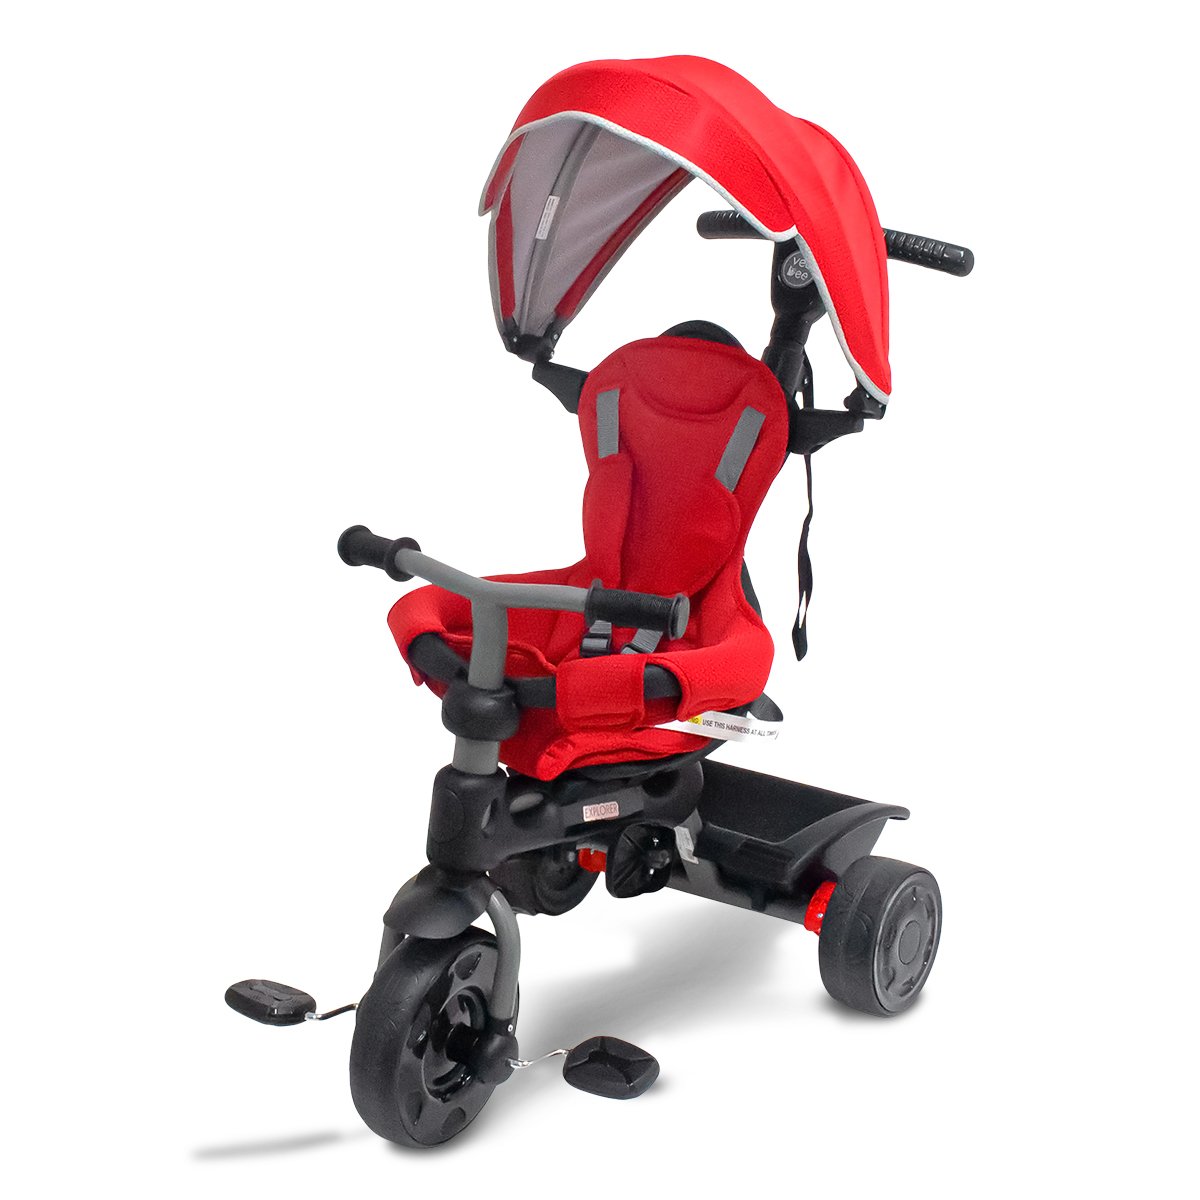 Veebee Explorer 3-stage Kids Trike With Canopy - Red - SILBERSHELL